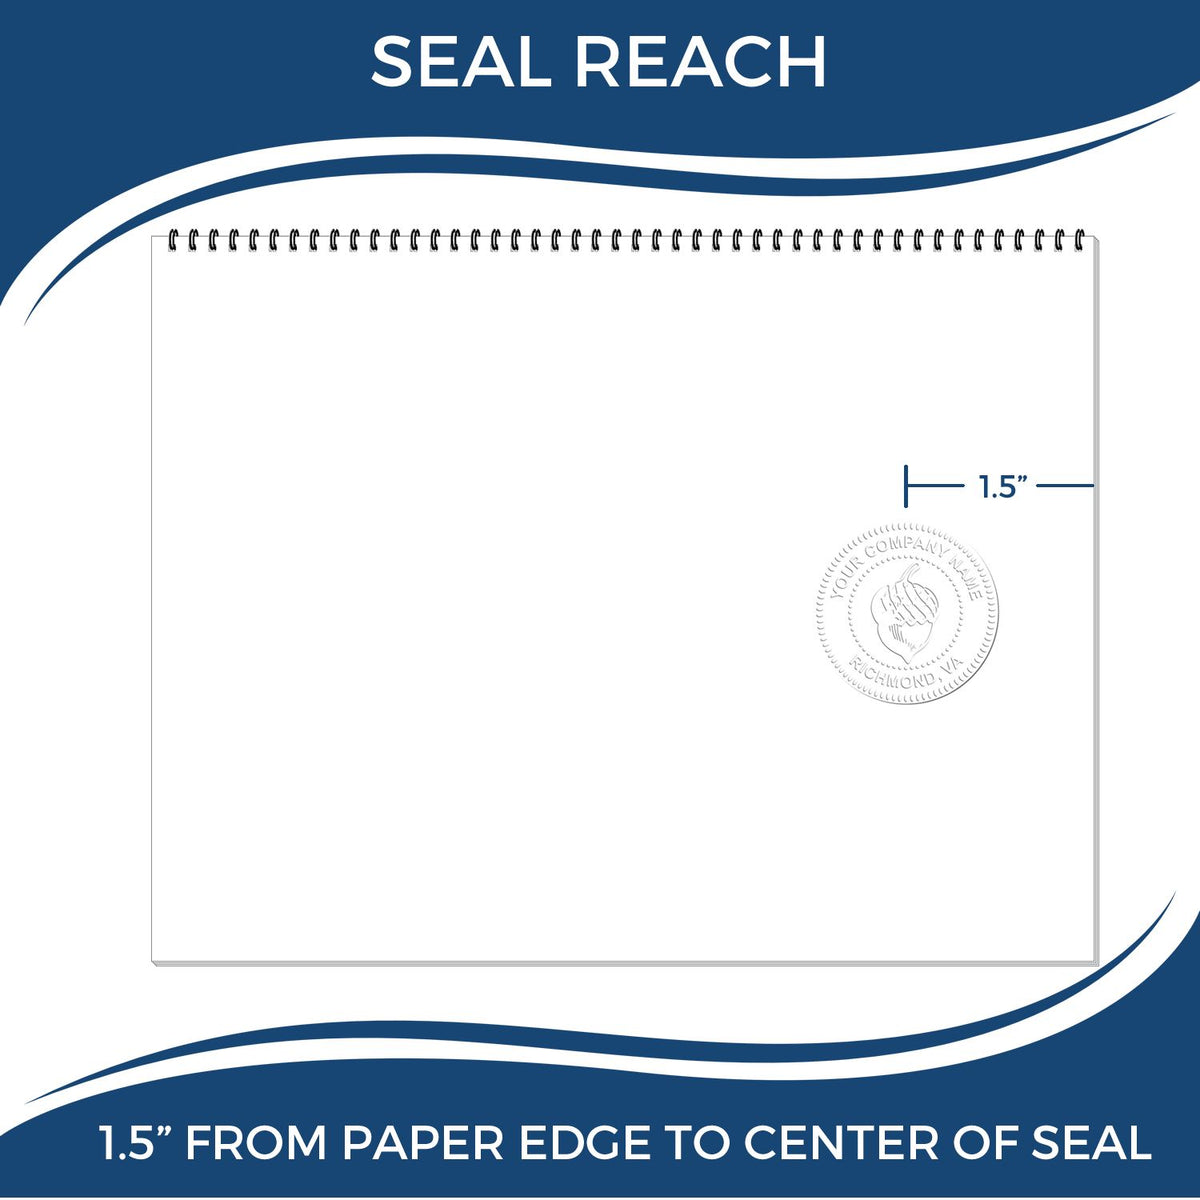 An infographic showing the seal reach which is represented by a ruler and a miniature seal image of the Hybrid Arizona Architect Seal